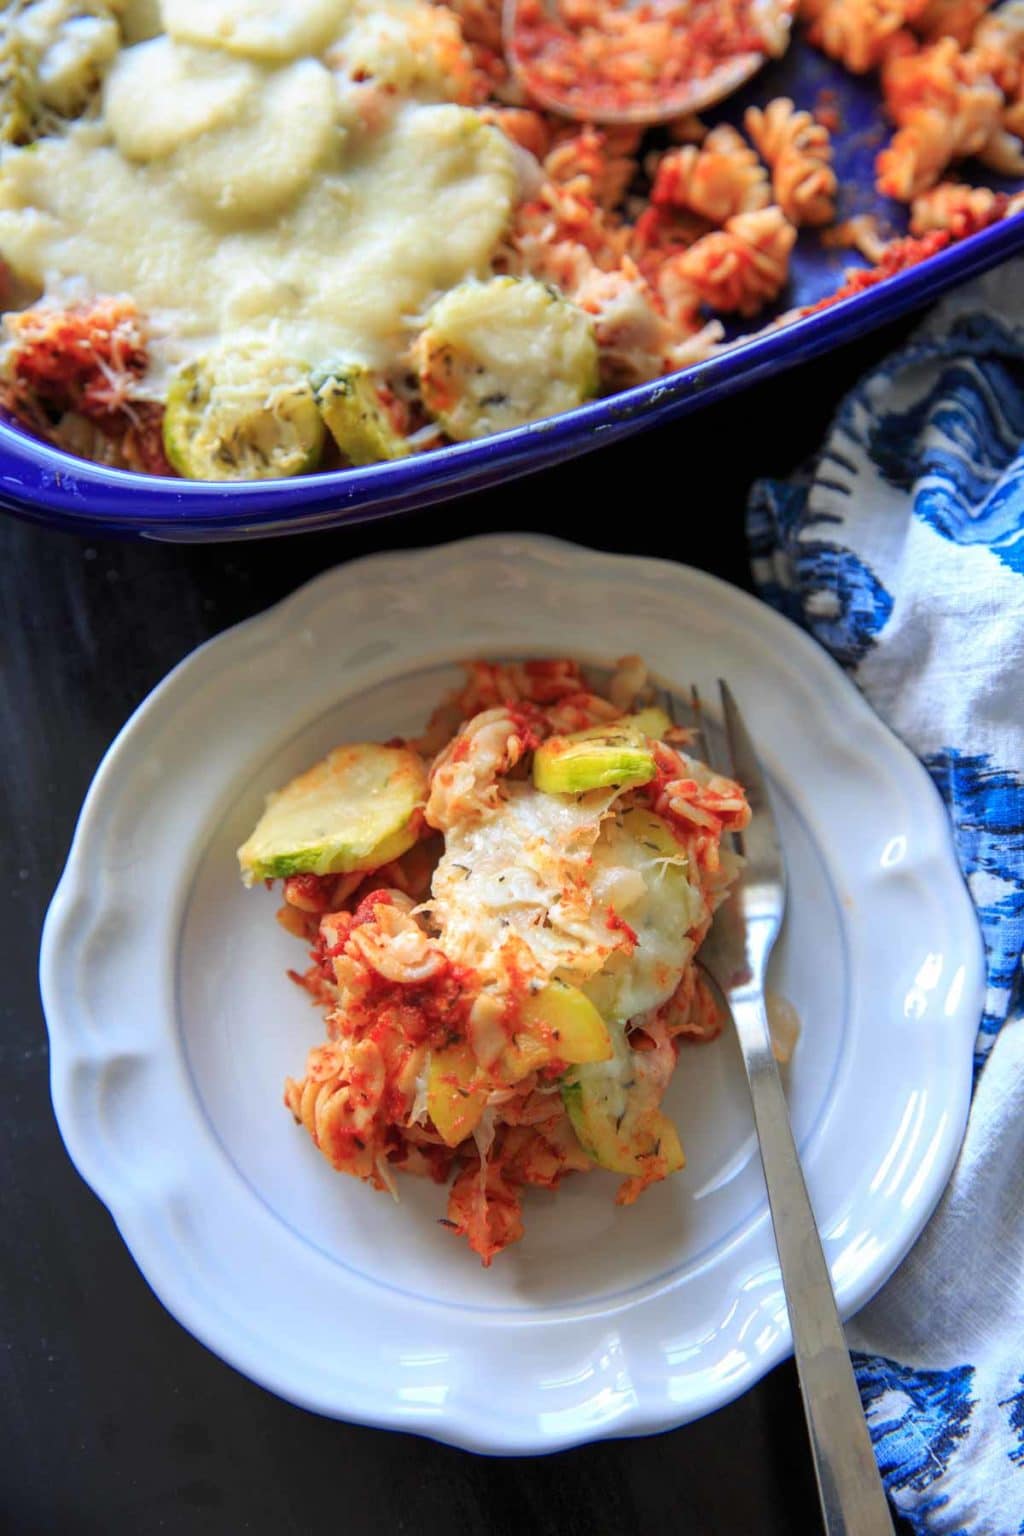 Zucchini Pasta Casserole with thyme. A super easy and healthy casserole that is easily gluten-free. With few ingredients (7 ingredients or less), dinner will be on the table in no time! Picture is plated single serving with full casserole in background.